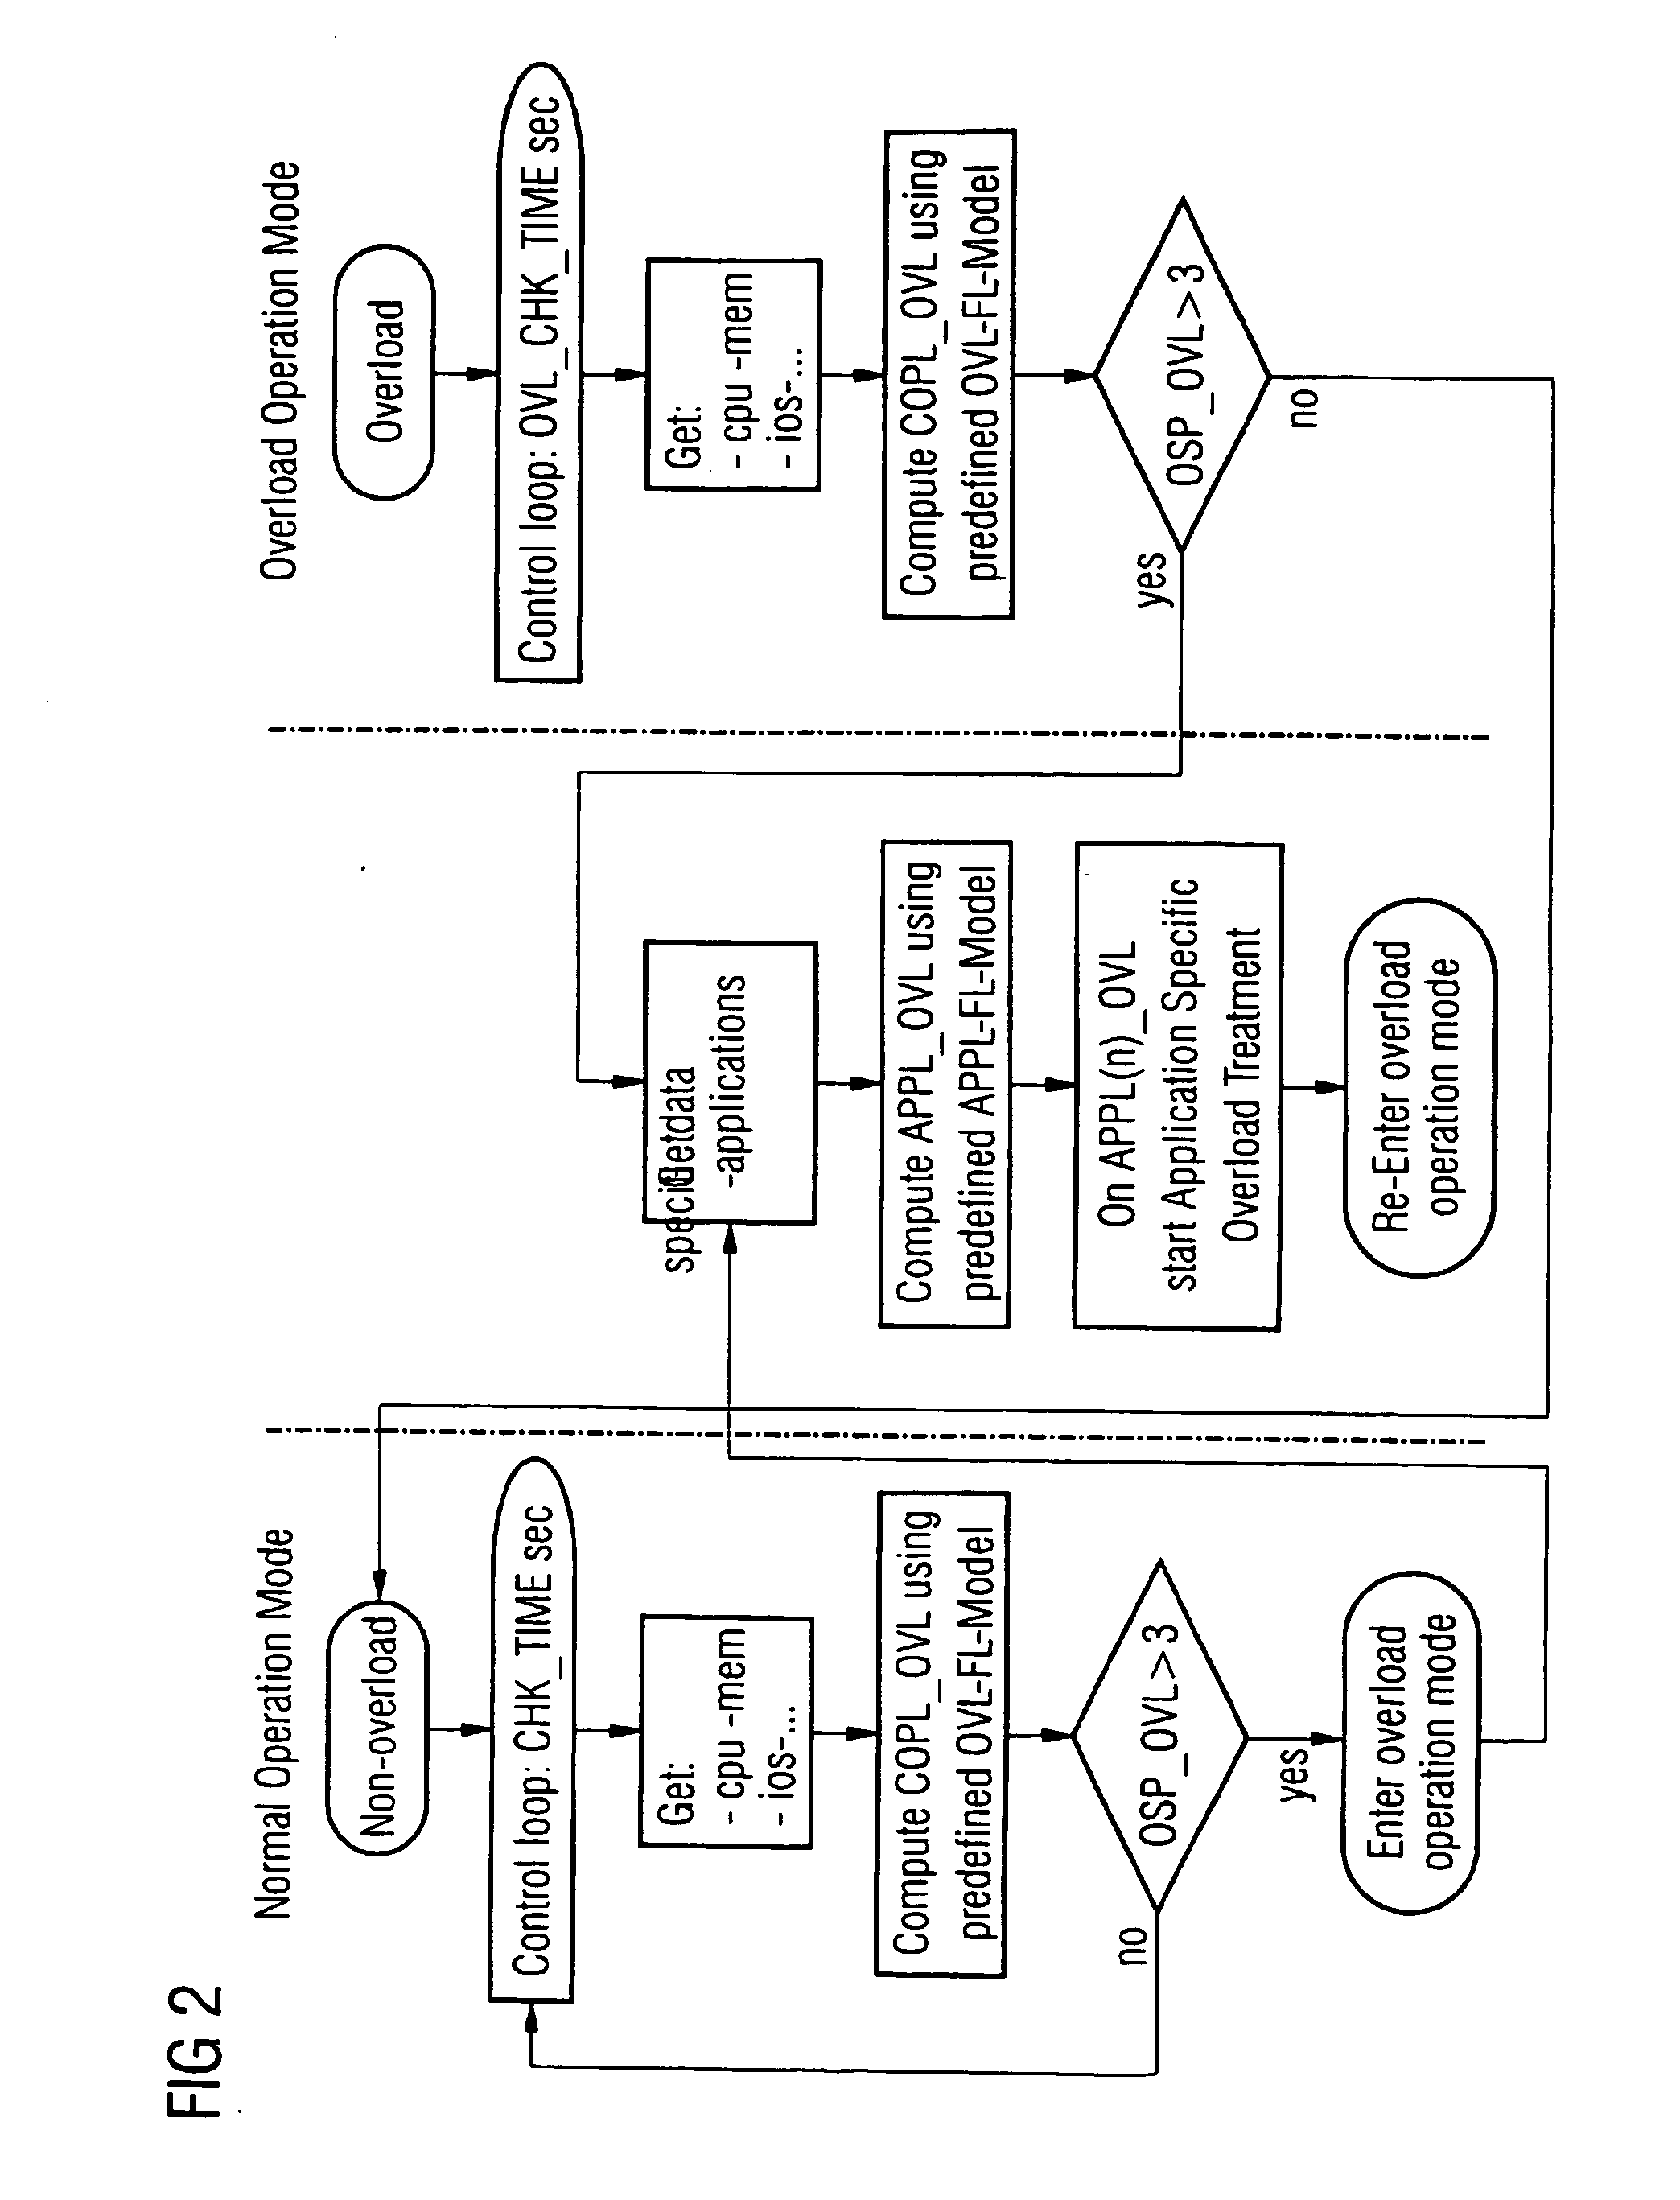 Fuzzy logic based intelligent load control for multimedia and telecommunication systems